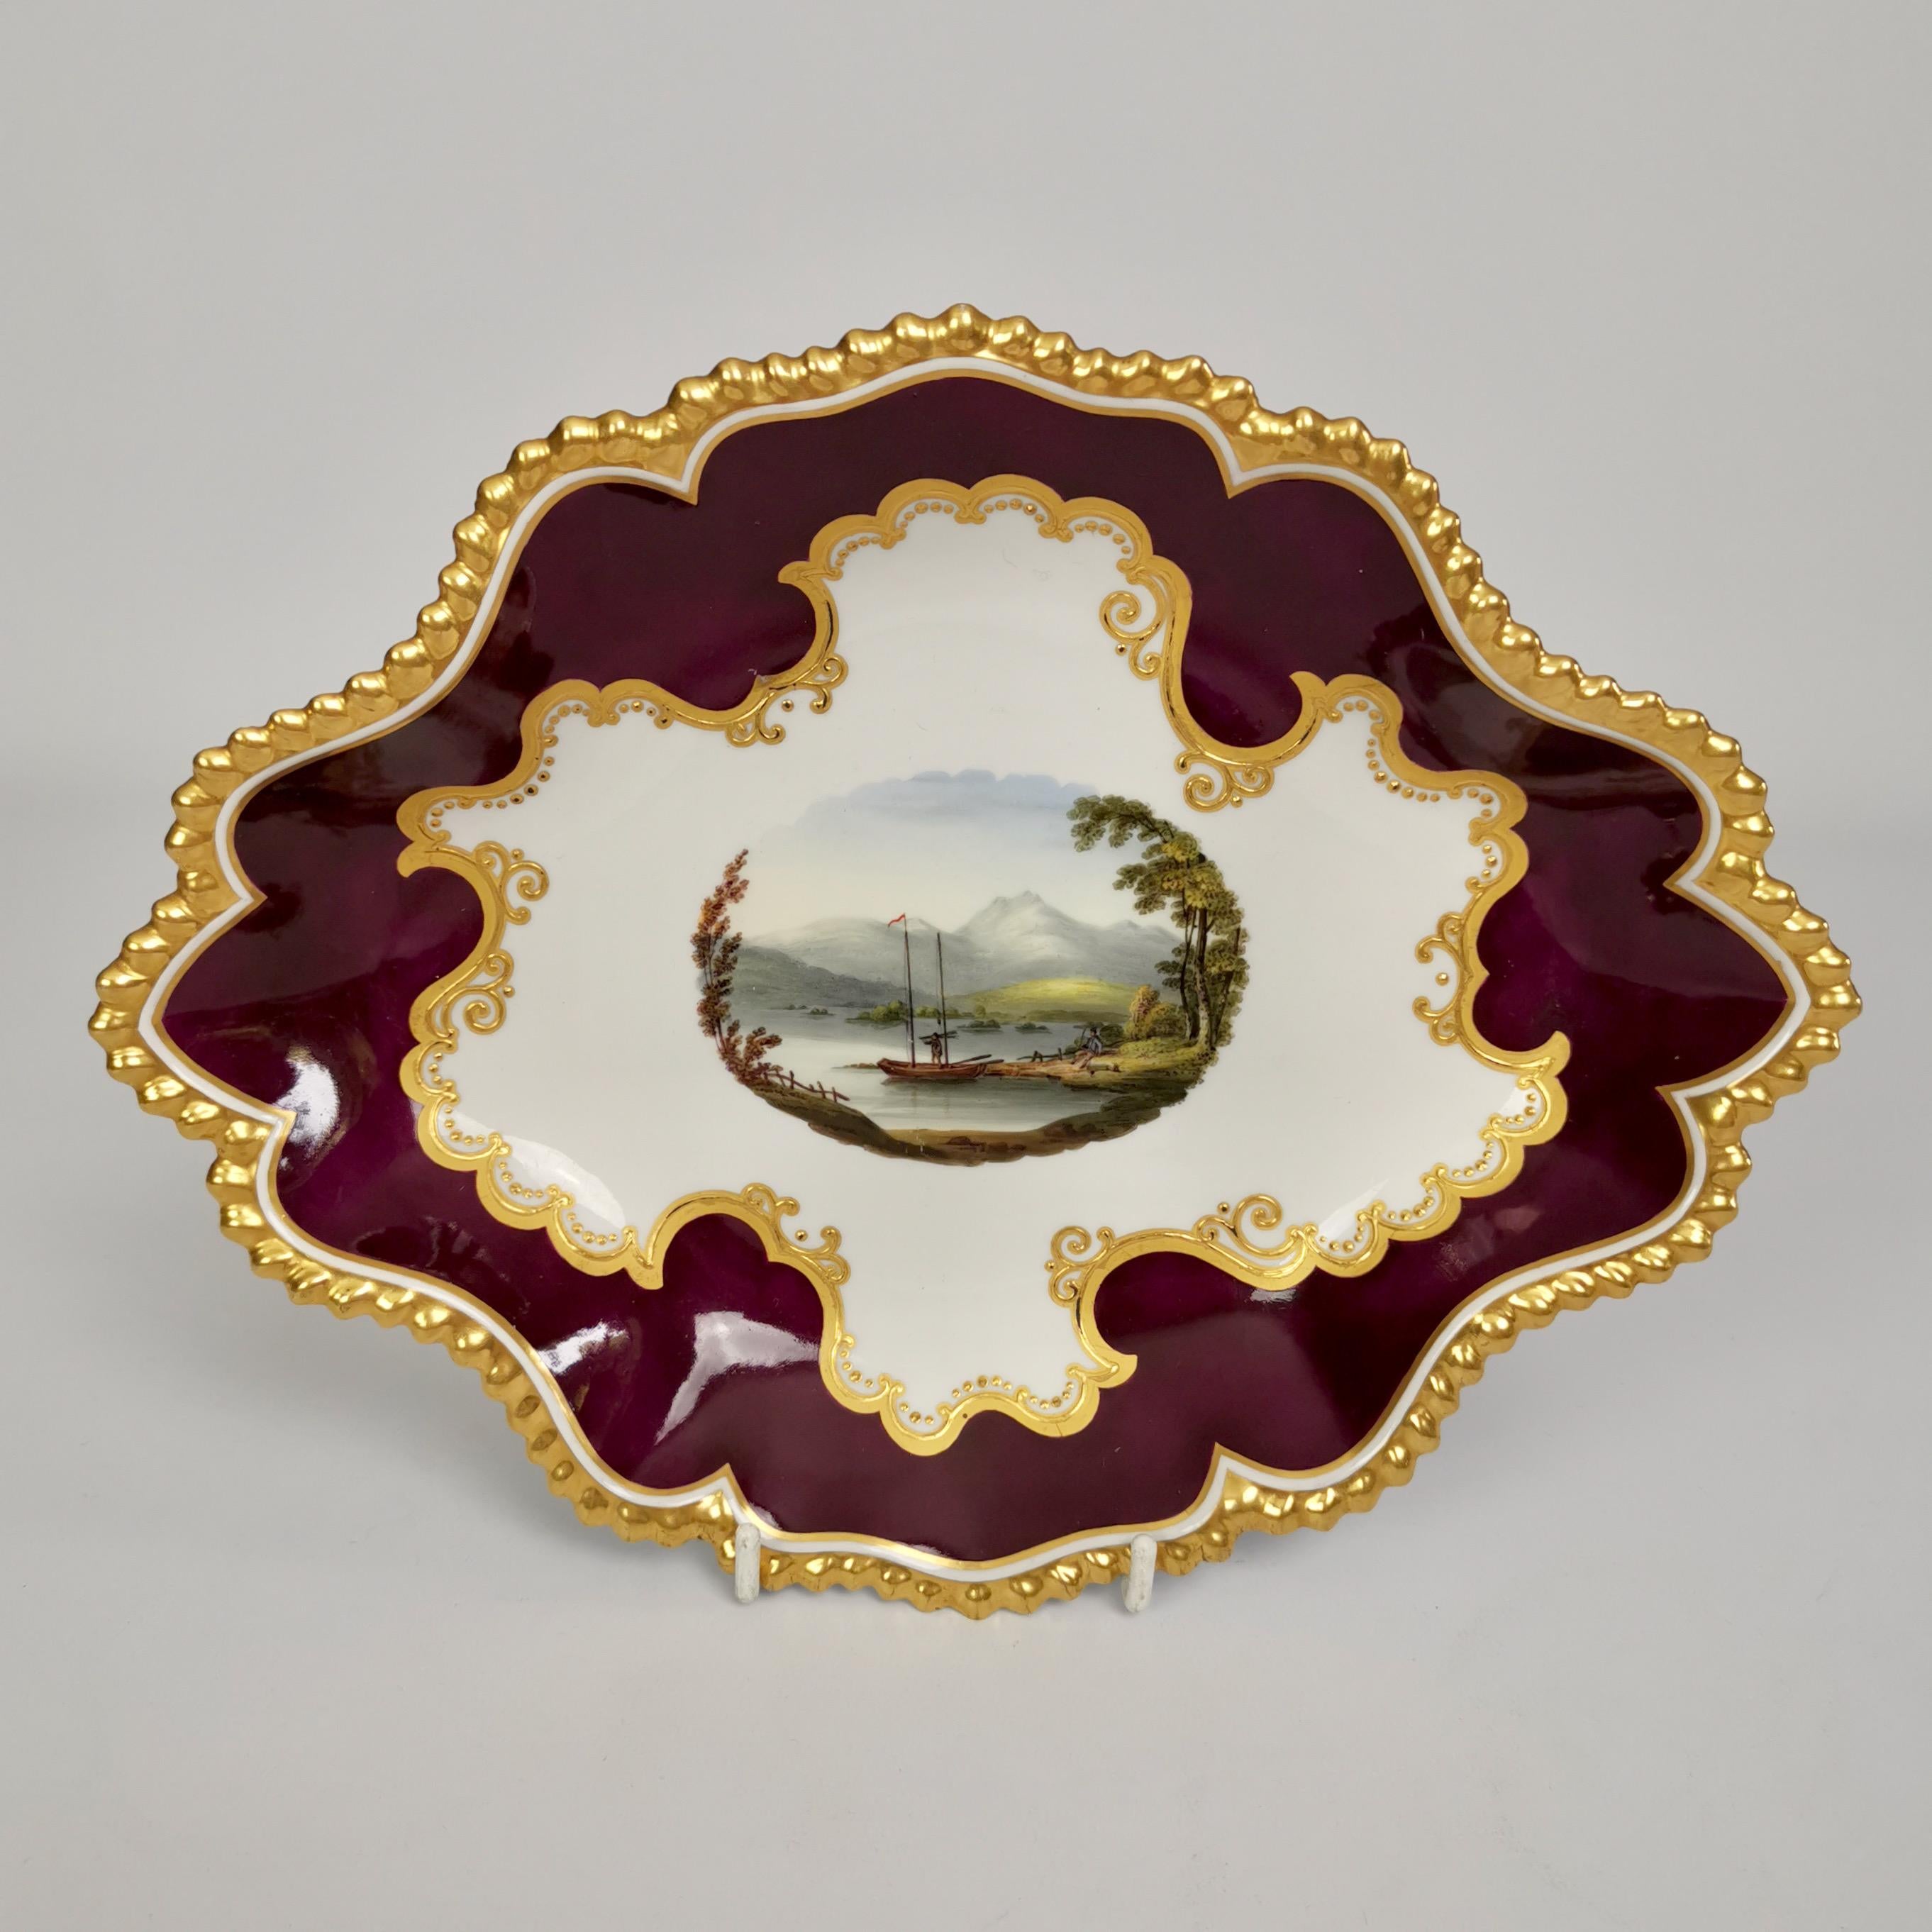 This is a beautiful set of a serving dish and two dessert plates made by Flight, Barr & Barr between 1813 and 1840, most probably in the 1820s. The set has gadrooned rims, a beautiful deep maroon ground and stunning hand painted landscapes.
